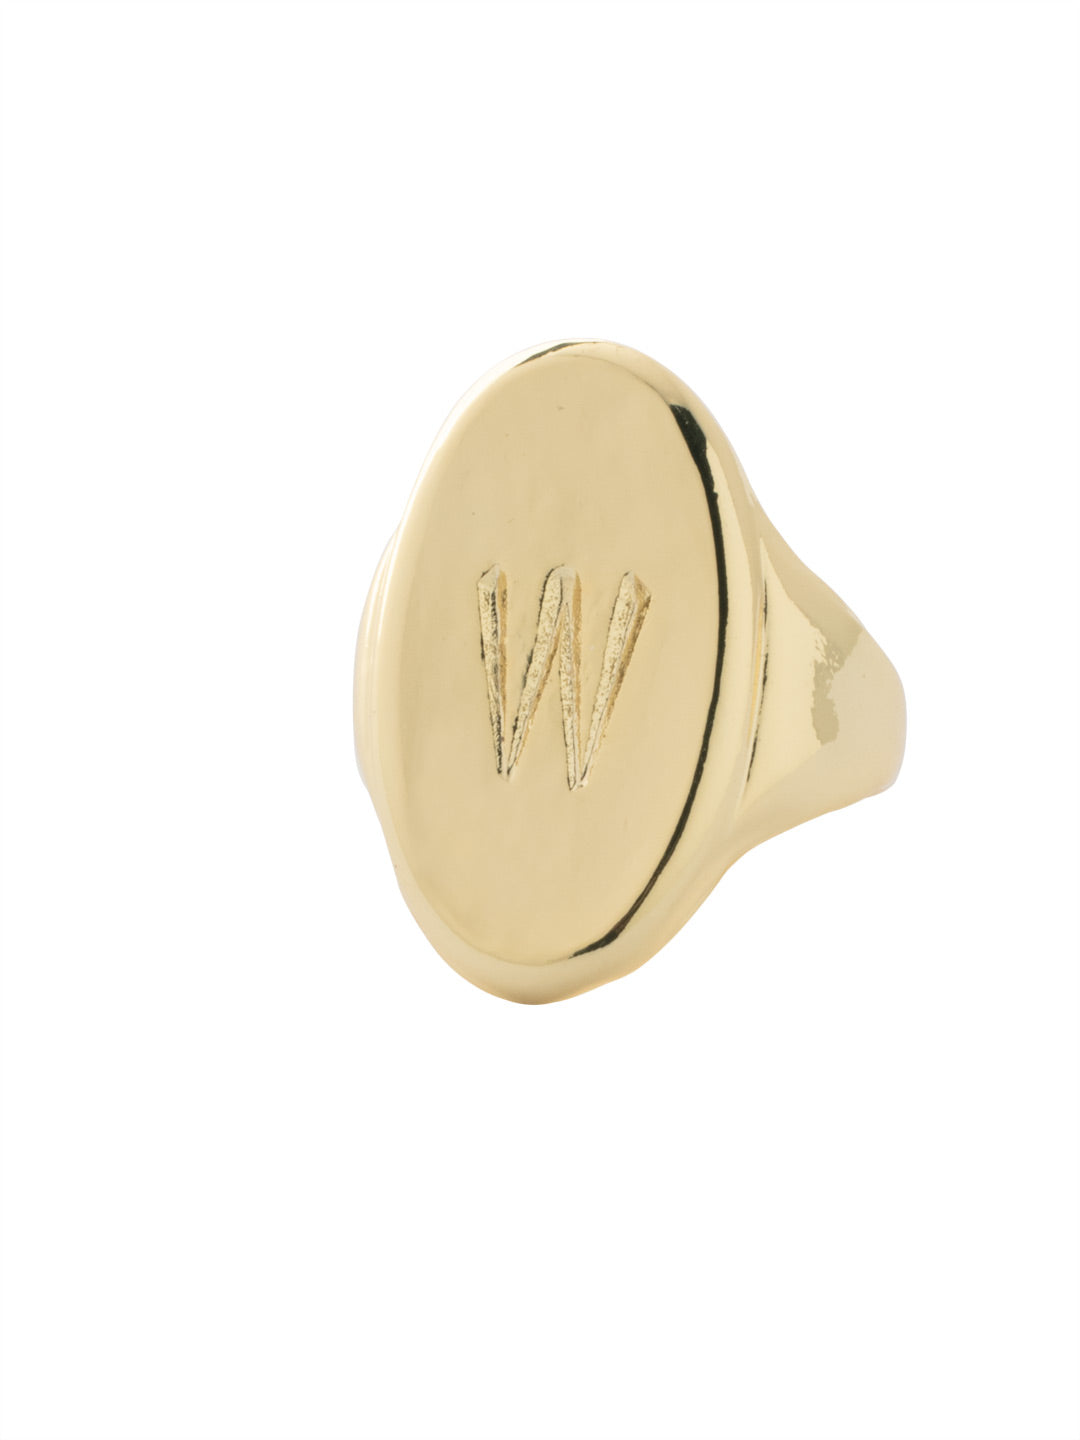 "W" Signet Statement Ring - RFK52BGMTL - <p>The Signet Statement Ring features a capital letter stamped into an oblong metal disk on an adjustable ring band. From Sorrelli's Bare Metallic collection in our Bright Gold-tone finish.</p>